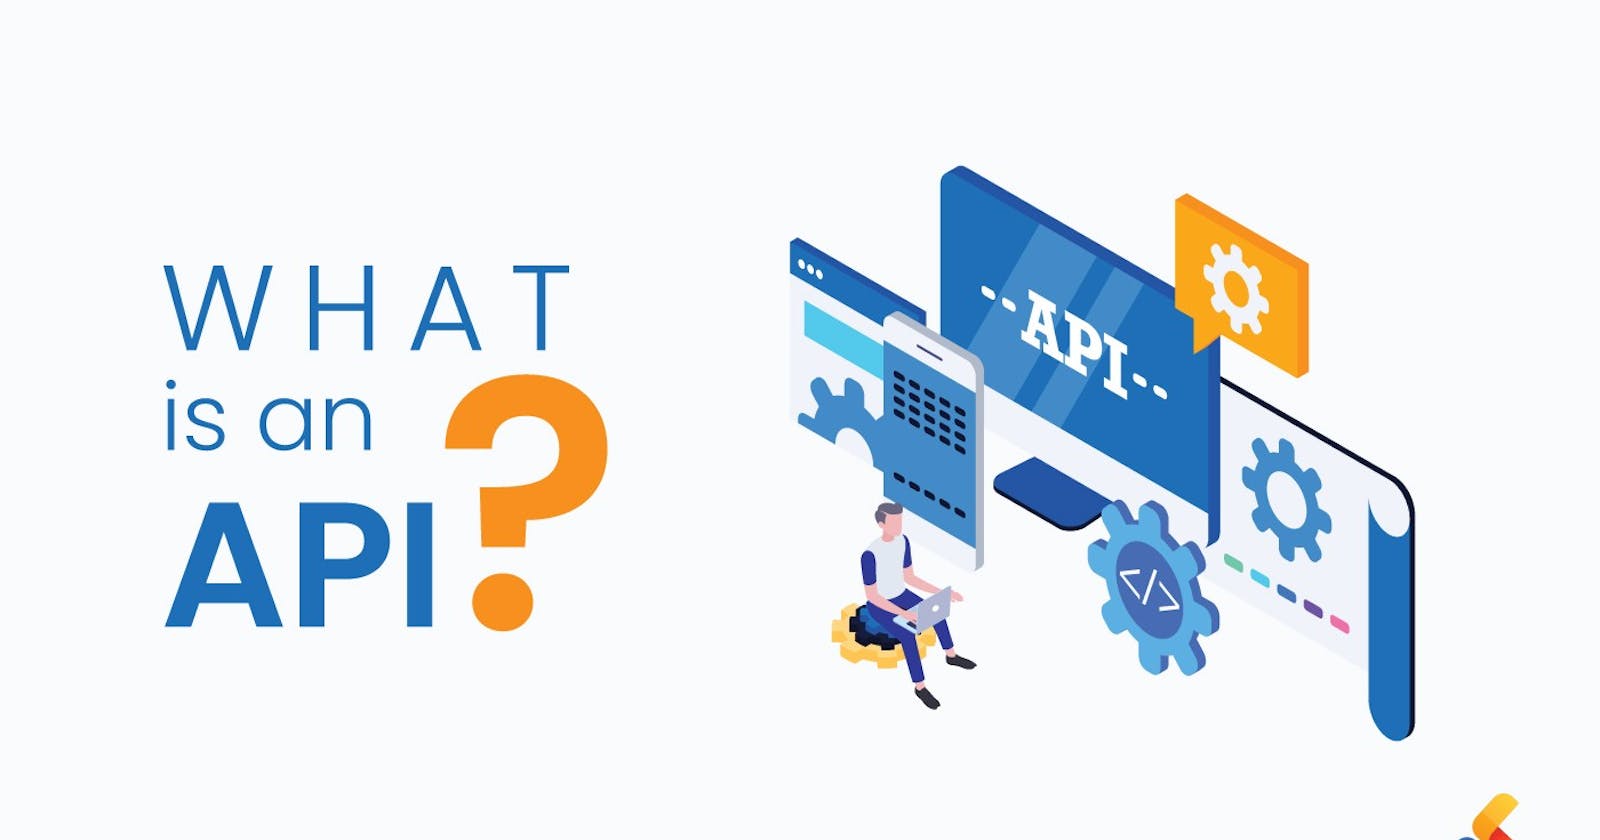 Learn what an API is in 60secs